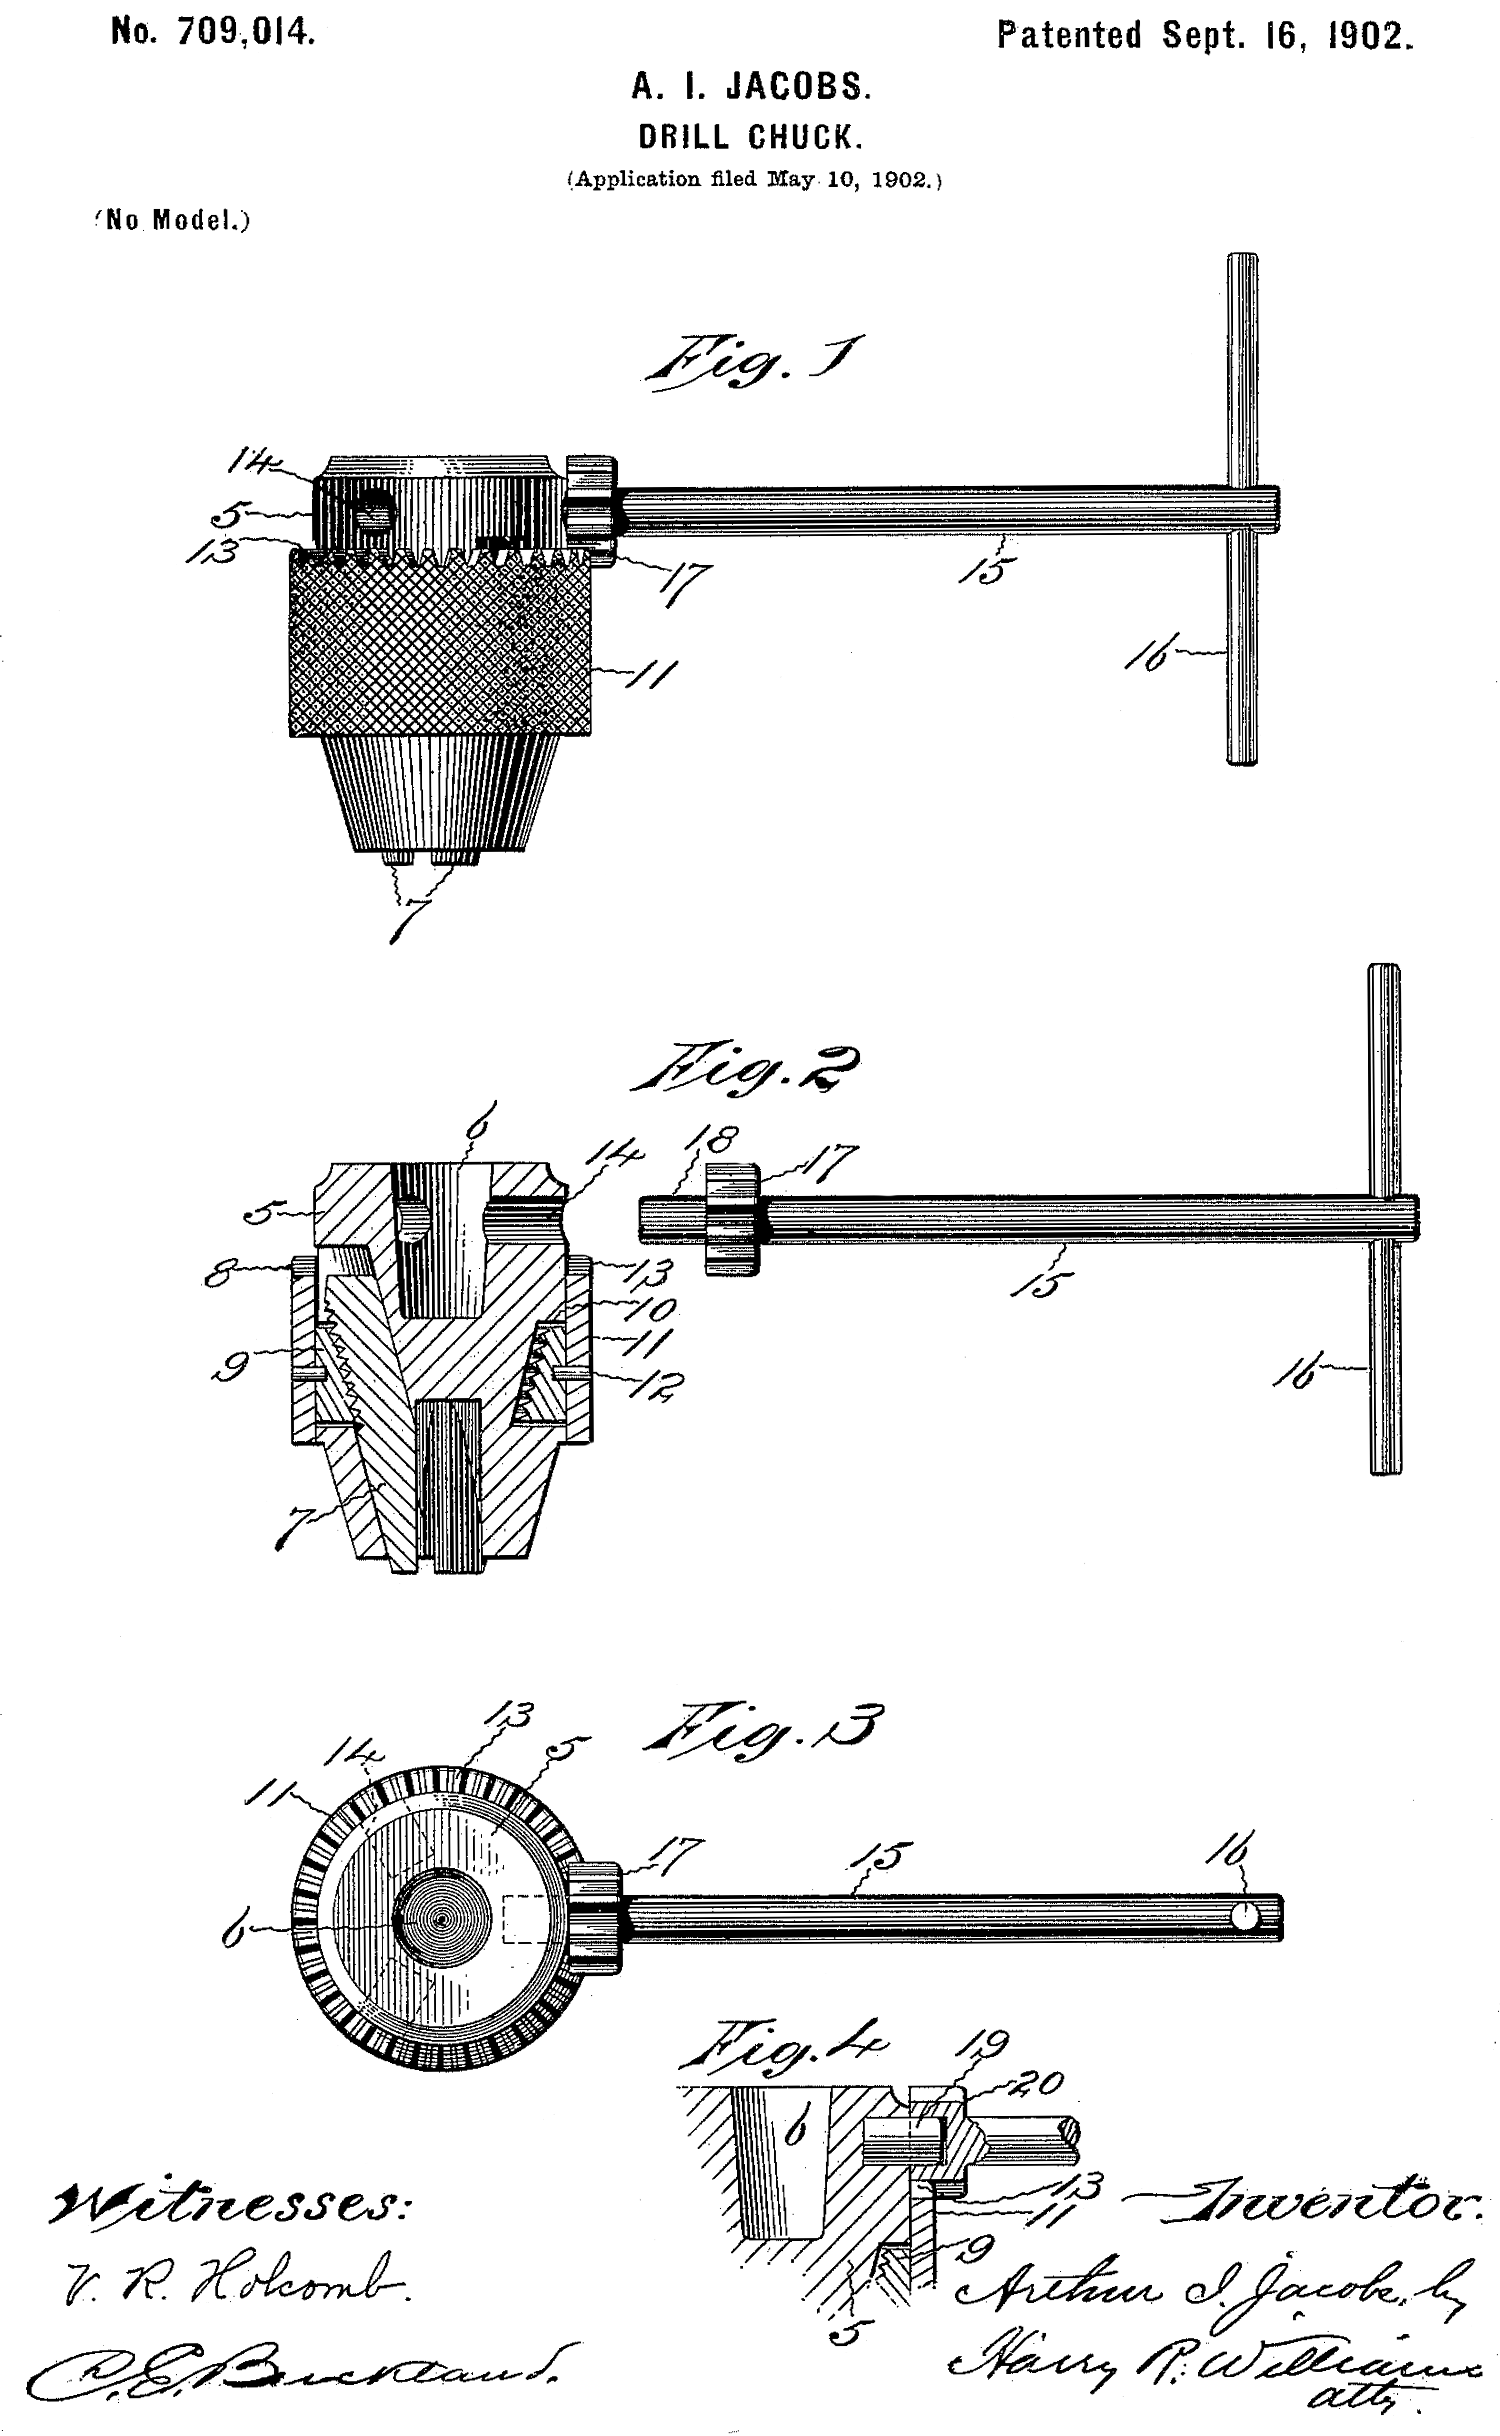 JACOBS Patent.png